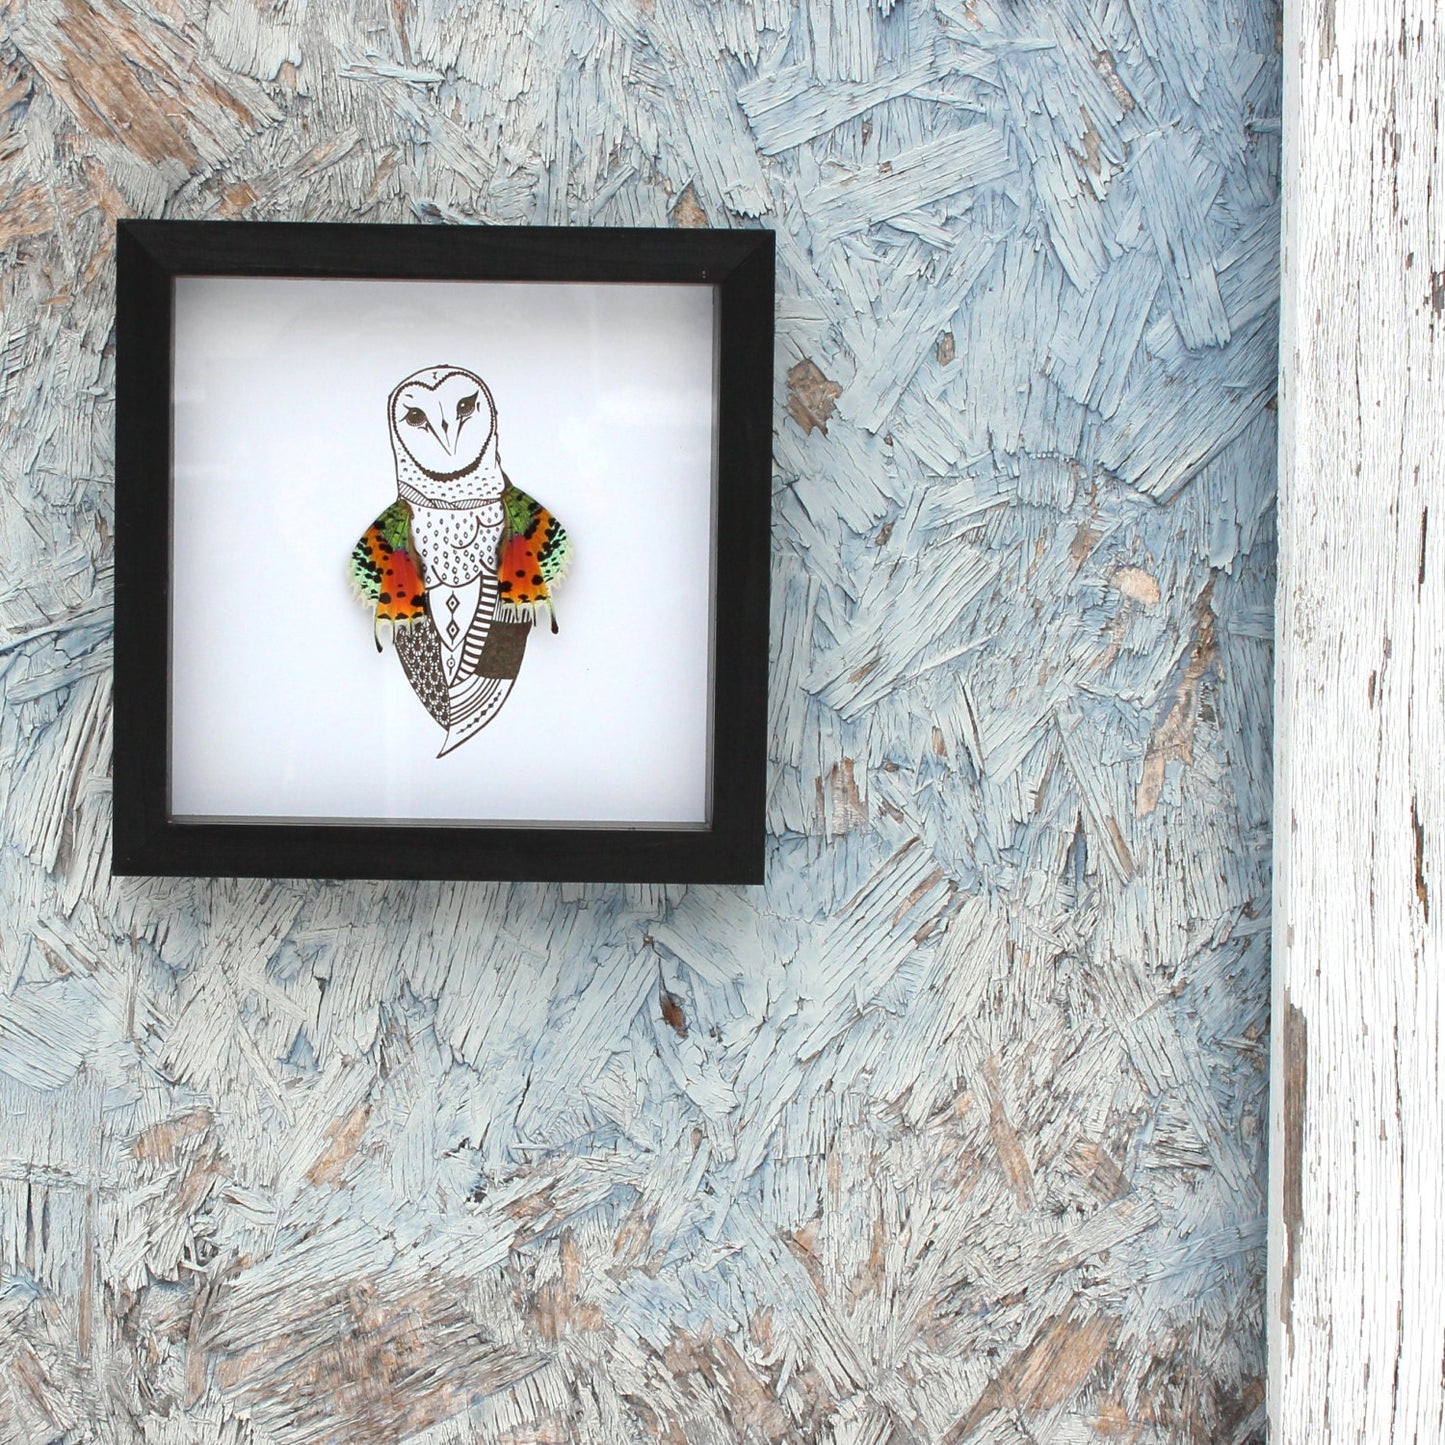 Butterfly Wings on Barn Owl Illustration Framed with Wings From and For Conservation